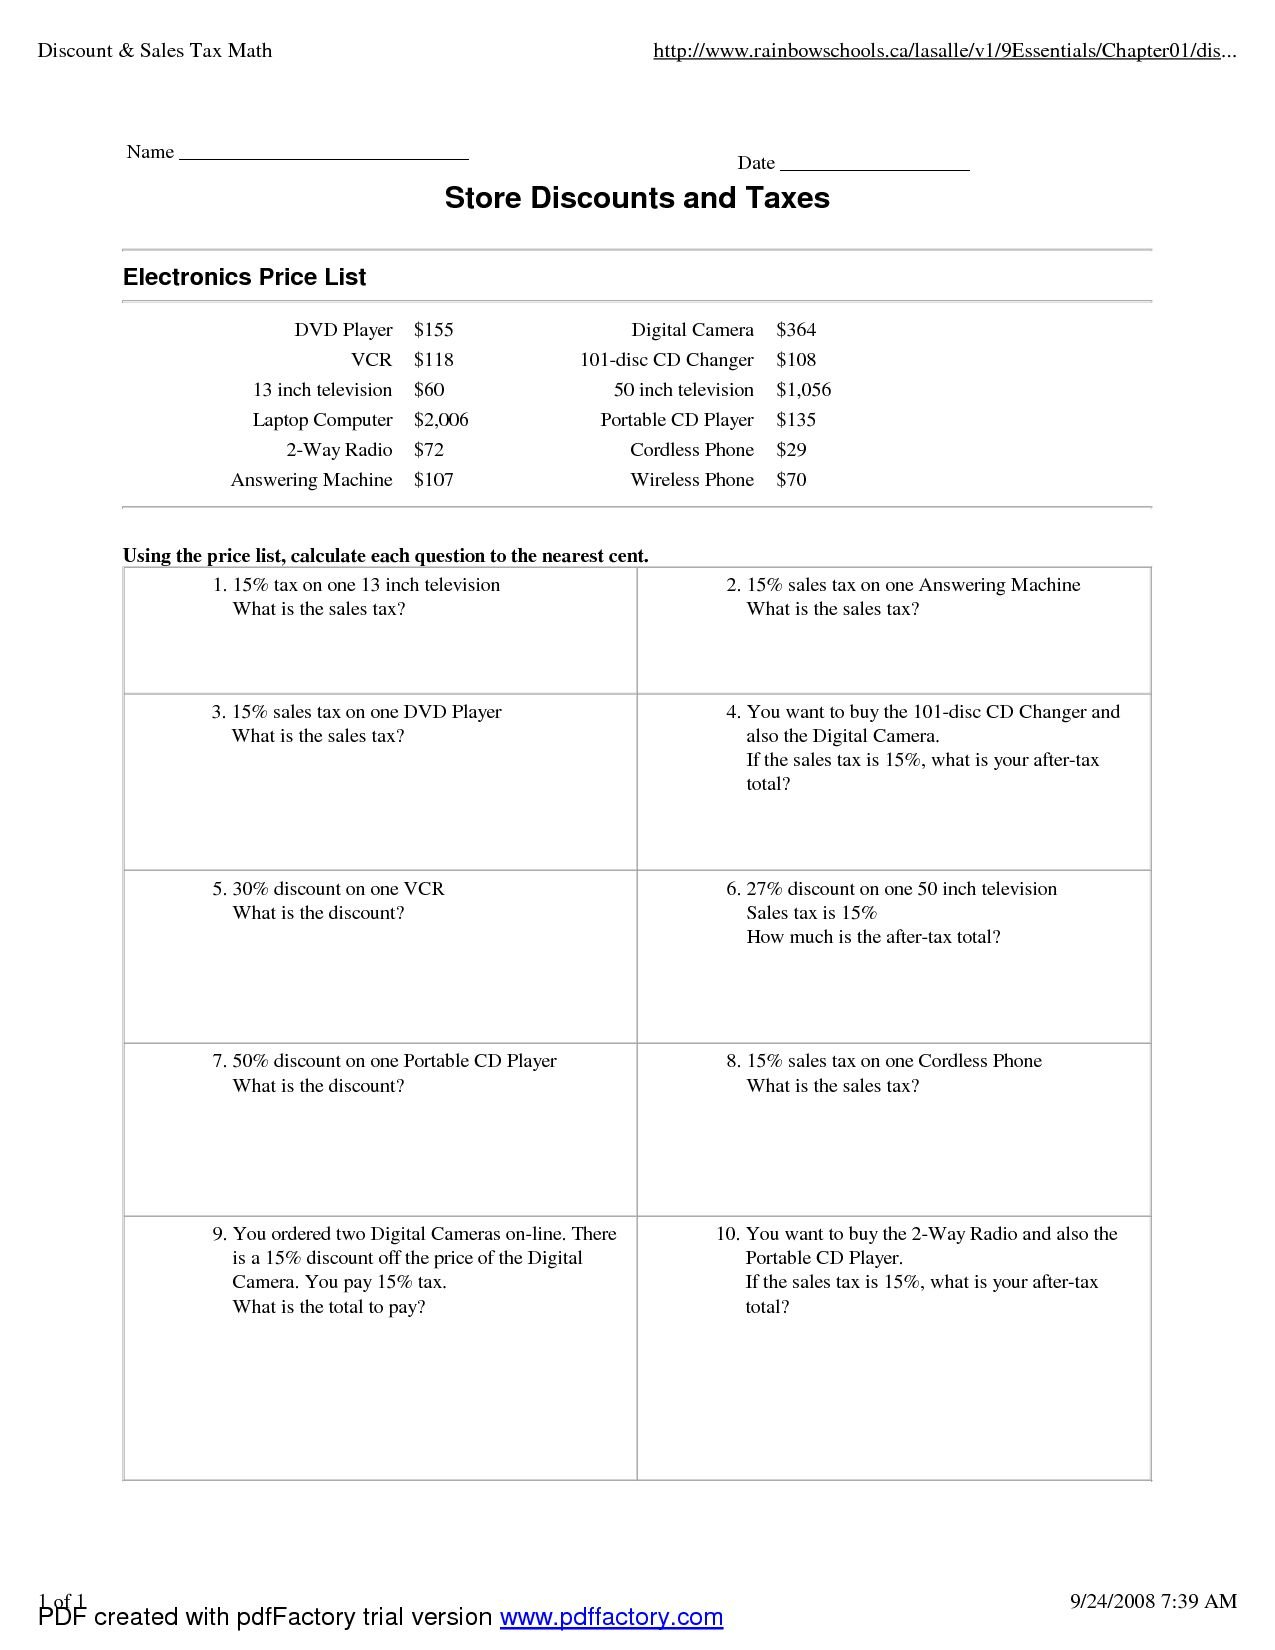 Markups And Markdowns Word Markup And Markdown Worksheet On Square Intended For Markup And Markdown Worksheet Answers